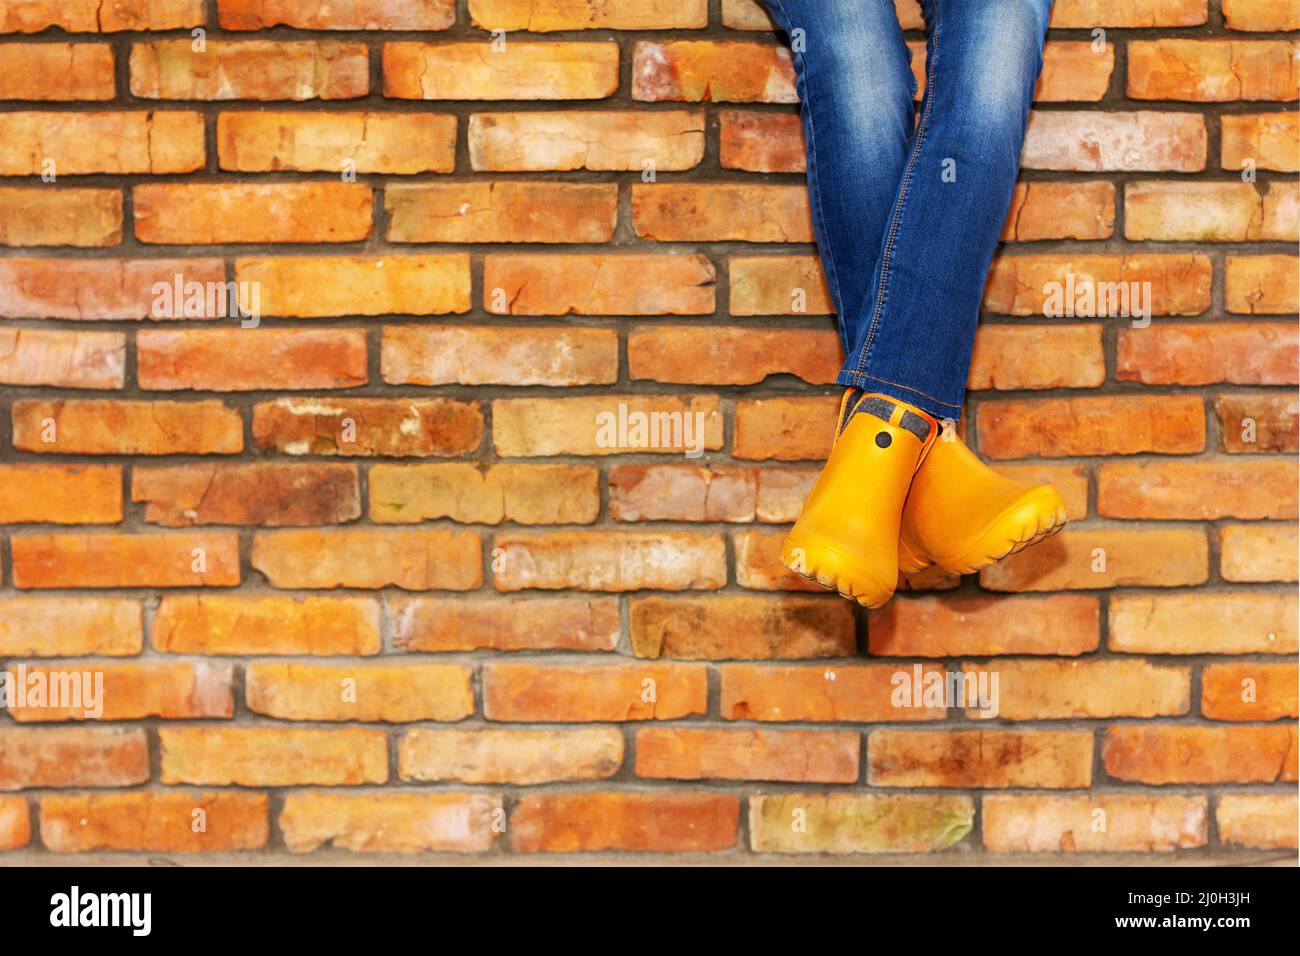 Cross-legged sitting on a brick wall of a young girl in jeans and orange galoshes against the background of a brick wall with a Stock Photo